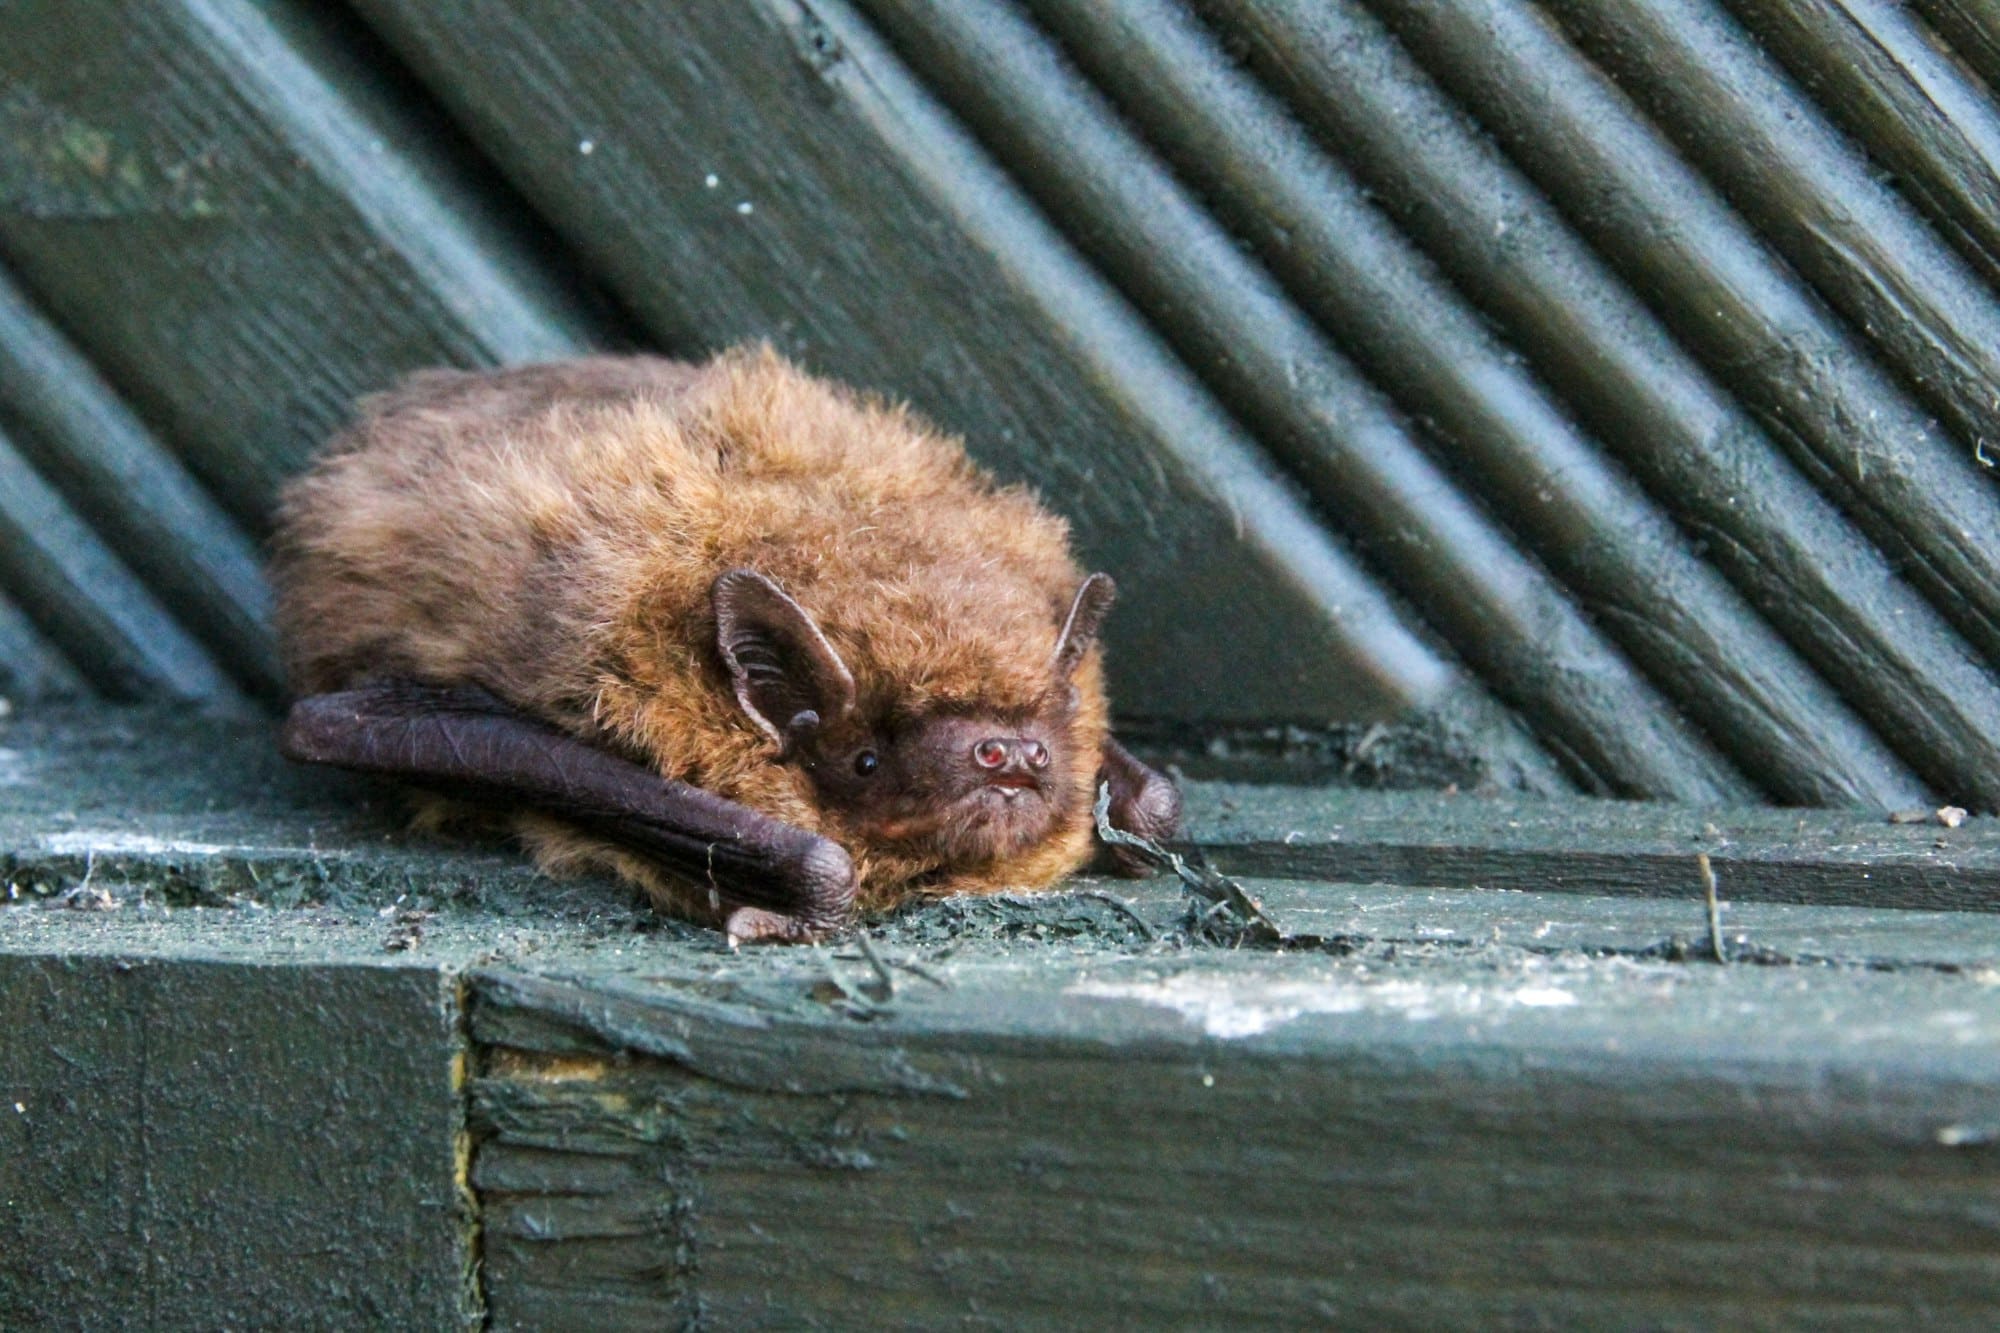 Brown pipistrelle bat resting on a concrete step near a metal fence in a peaceful setting.